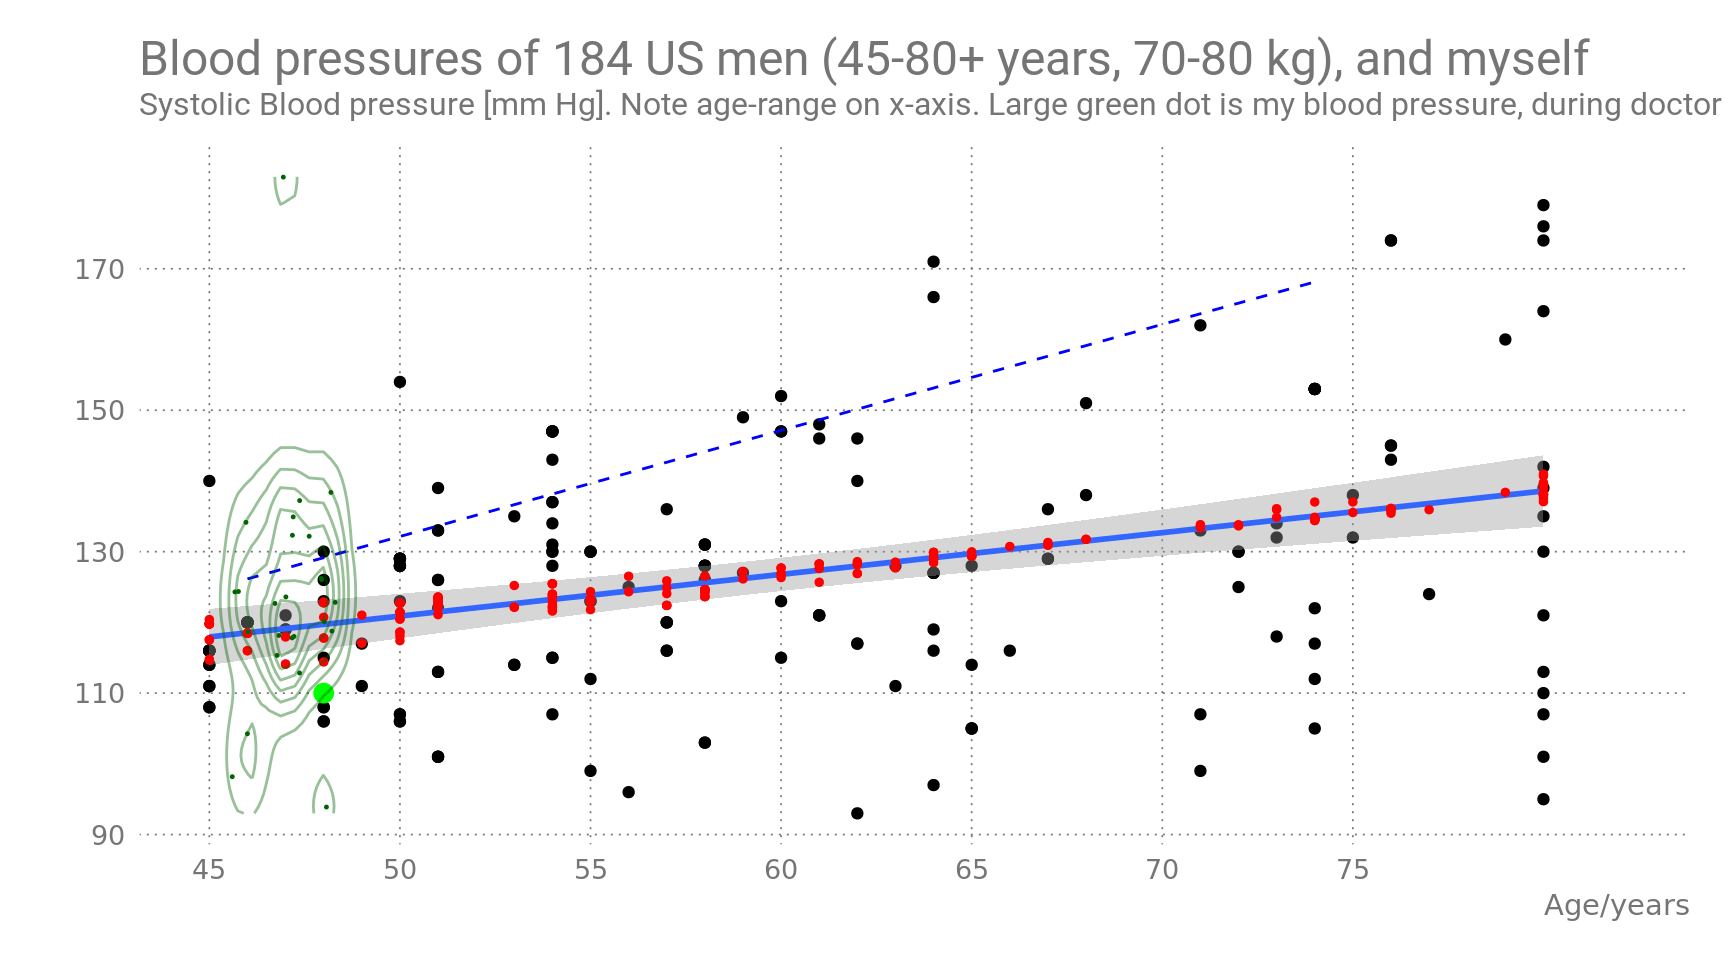 Blood pressure as a function of age and body weight. NHANES data filtered to match age-range of Figure 1, and my own  BMI- and weight-range. Red dots are predicted values by the two-regressor model.